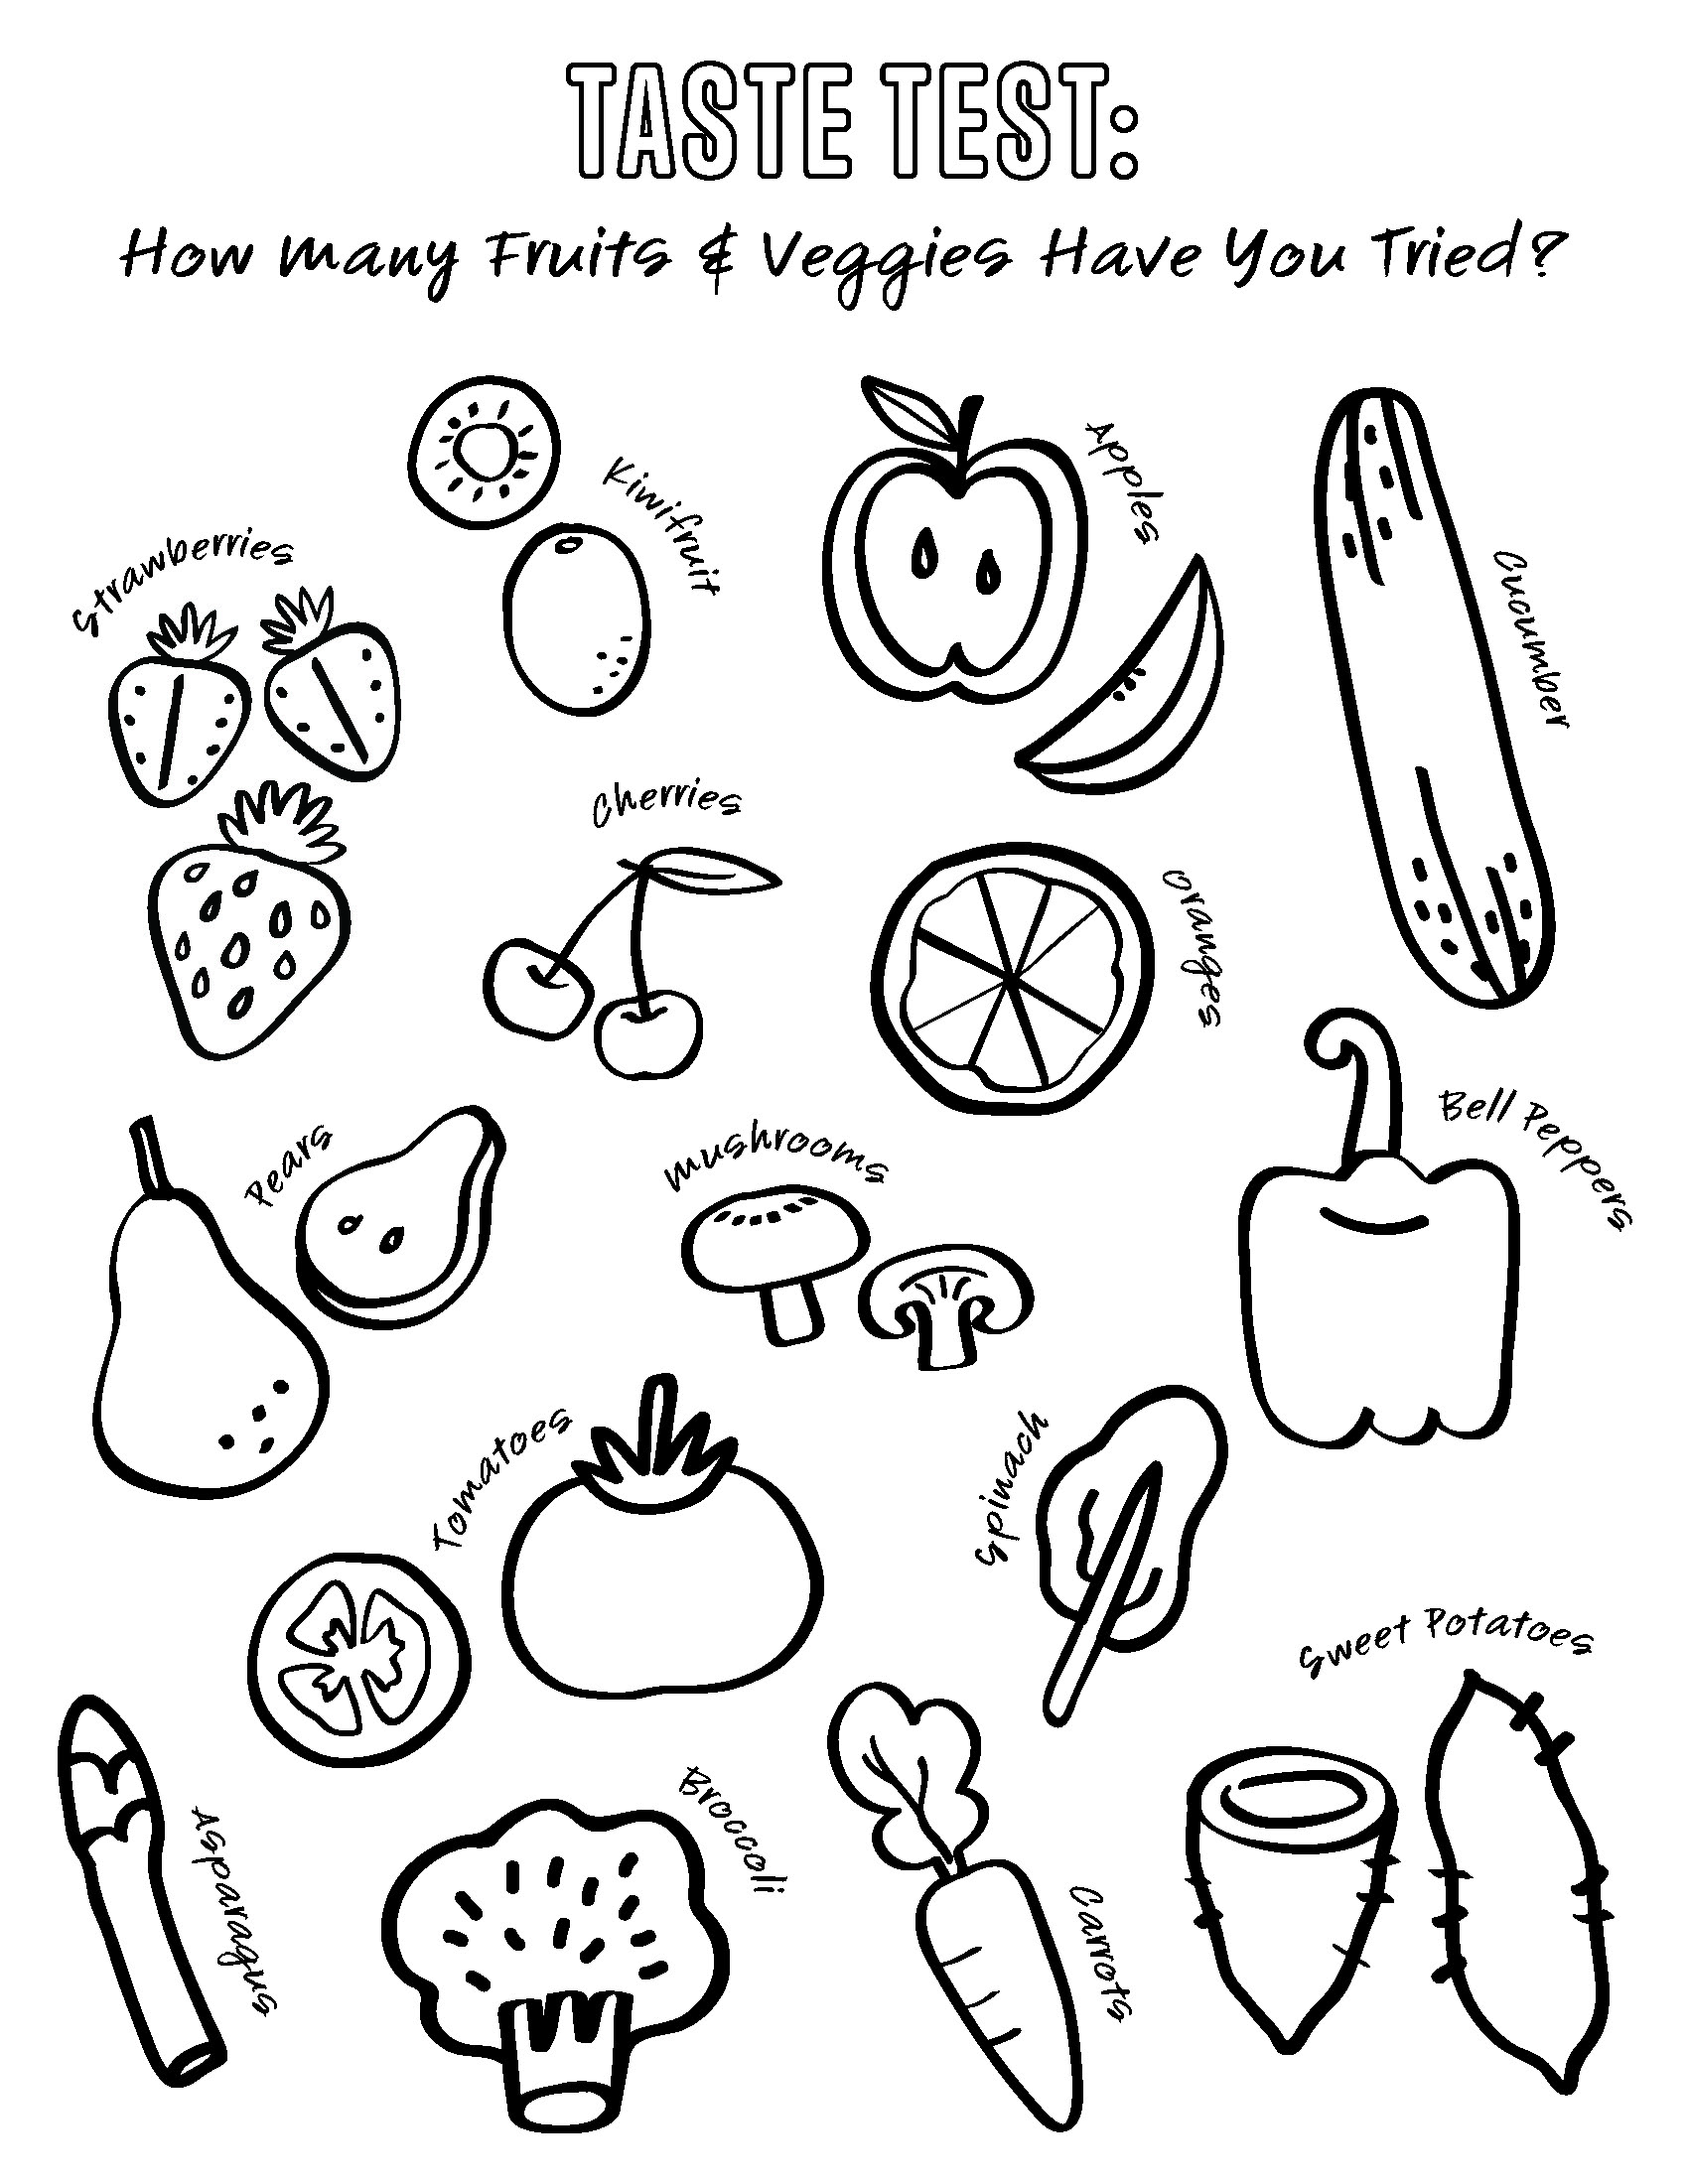 Coloring page with fruits and vegetables sketches